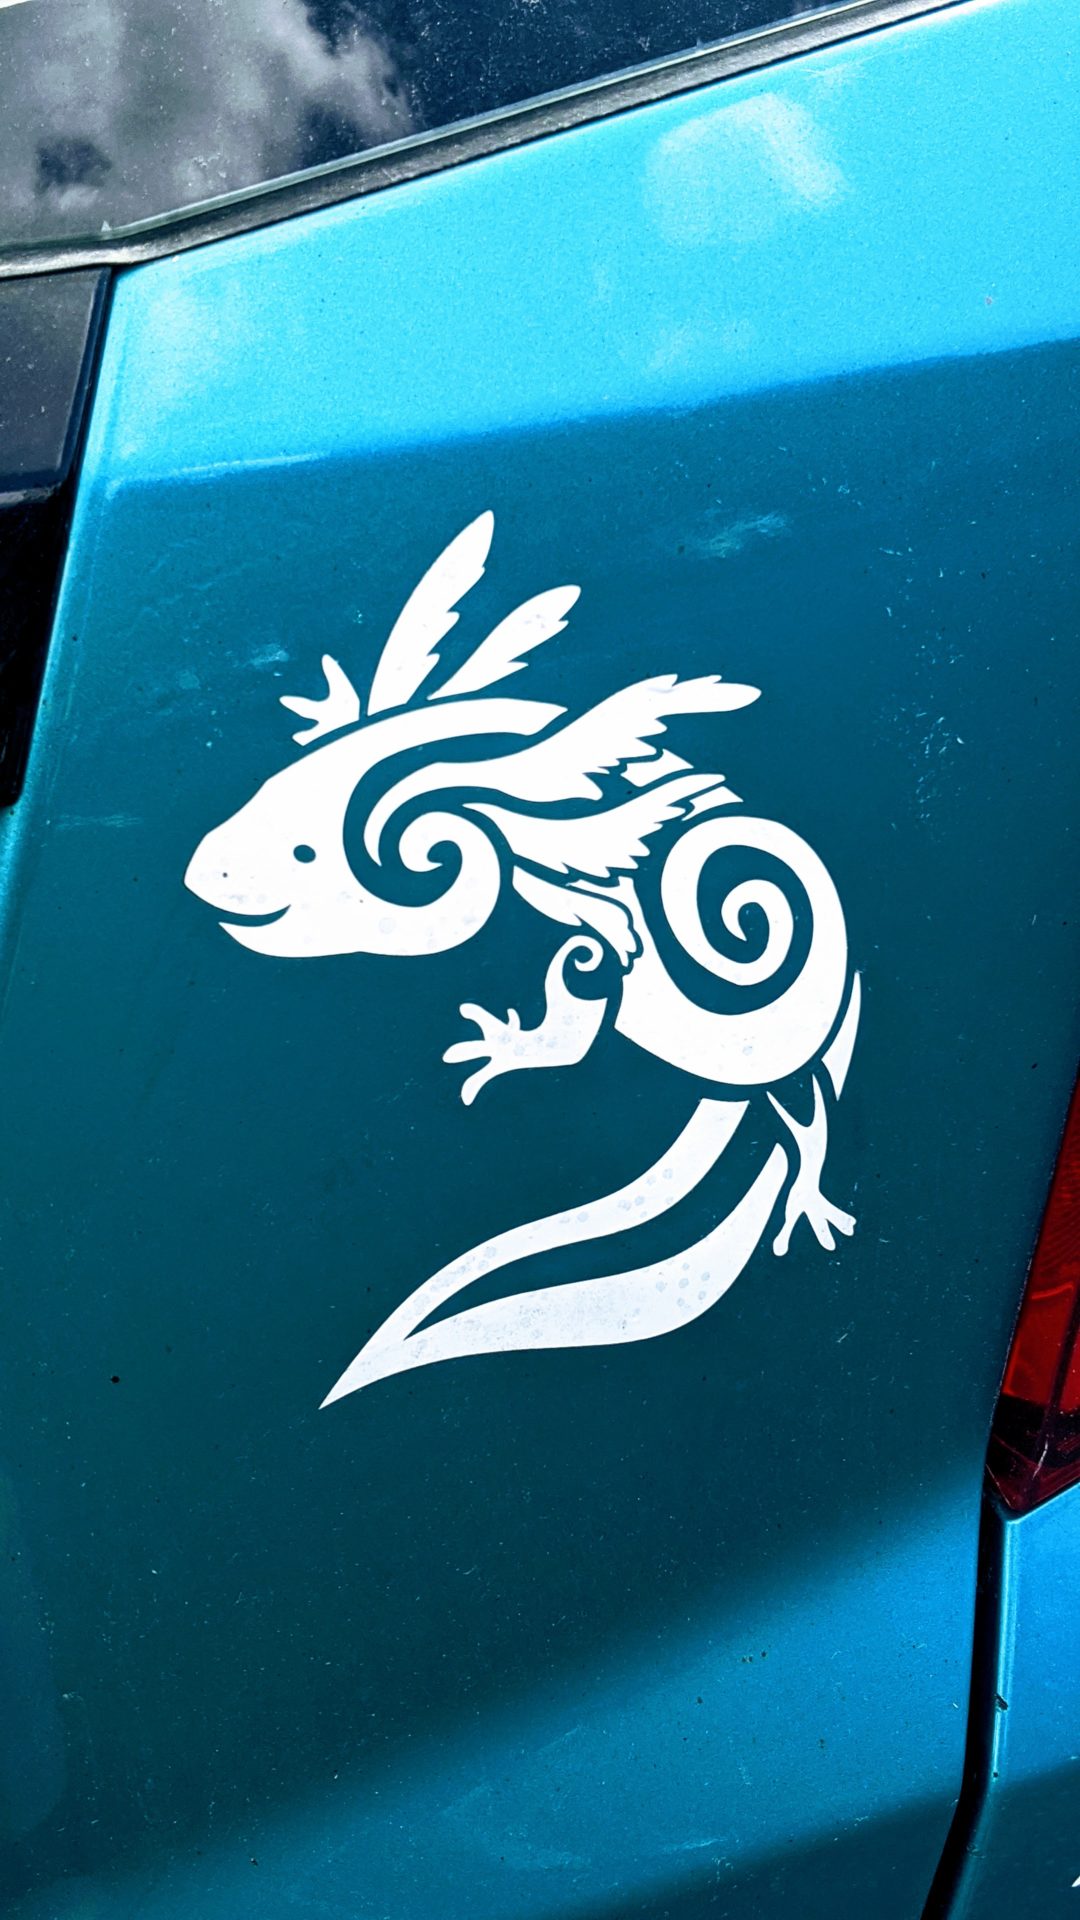 vinyl decal applied to car